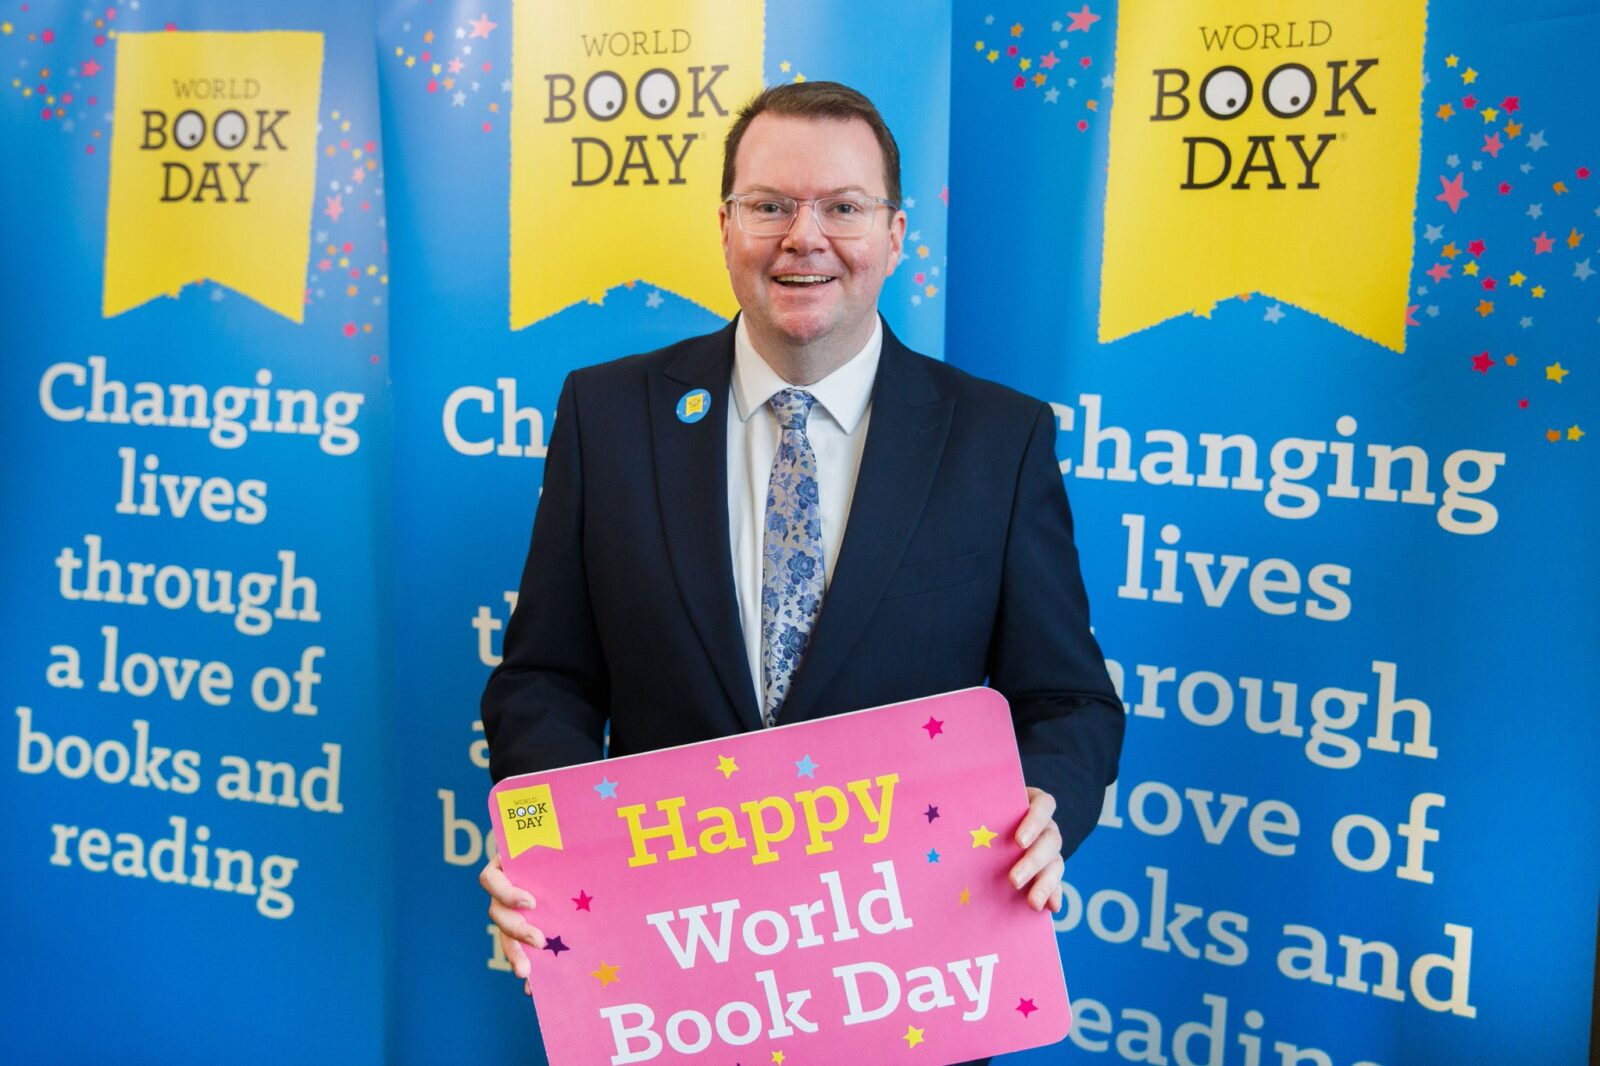 Conor pictured with infornt of "World Book Day" Posters